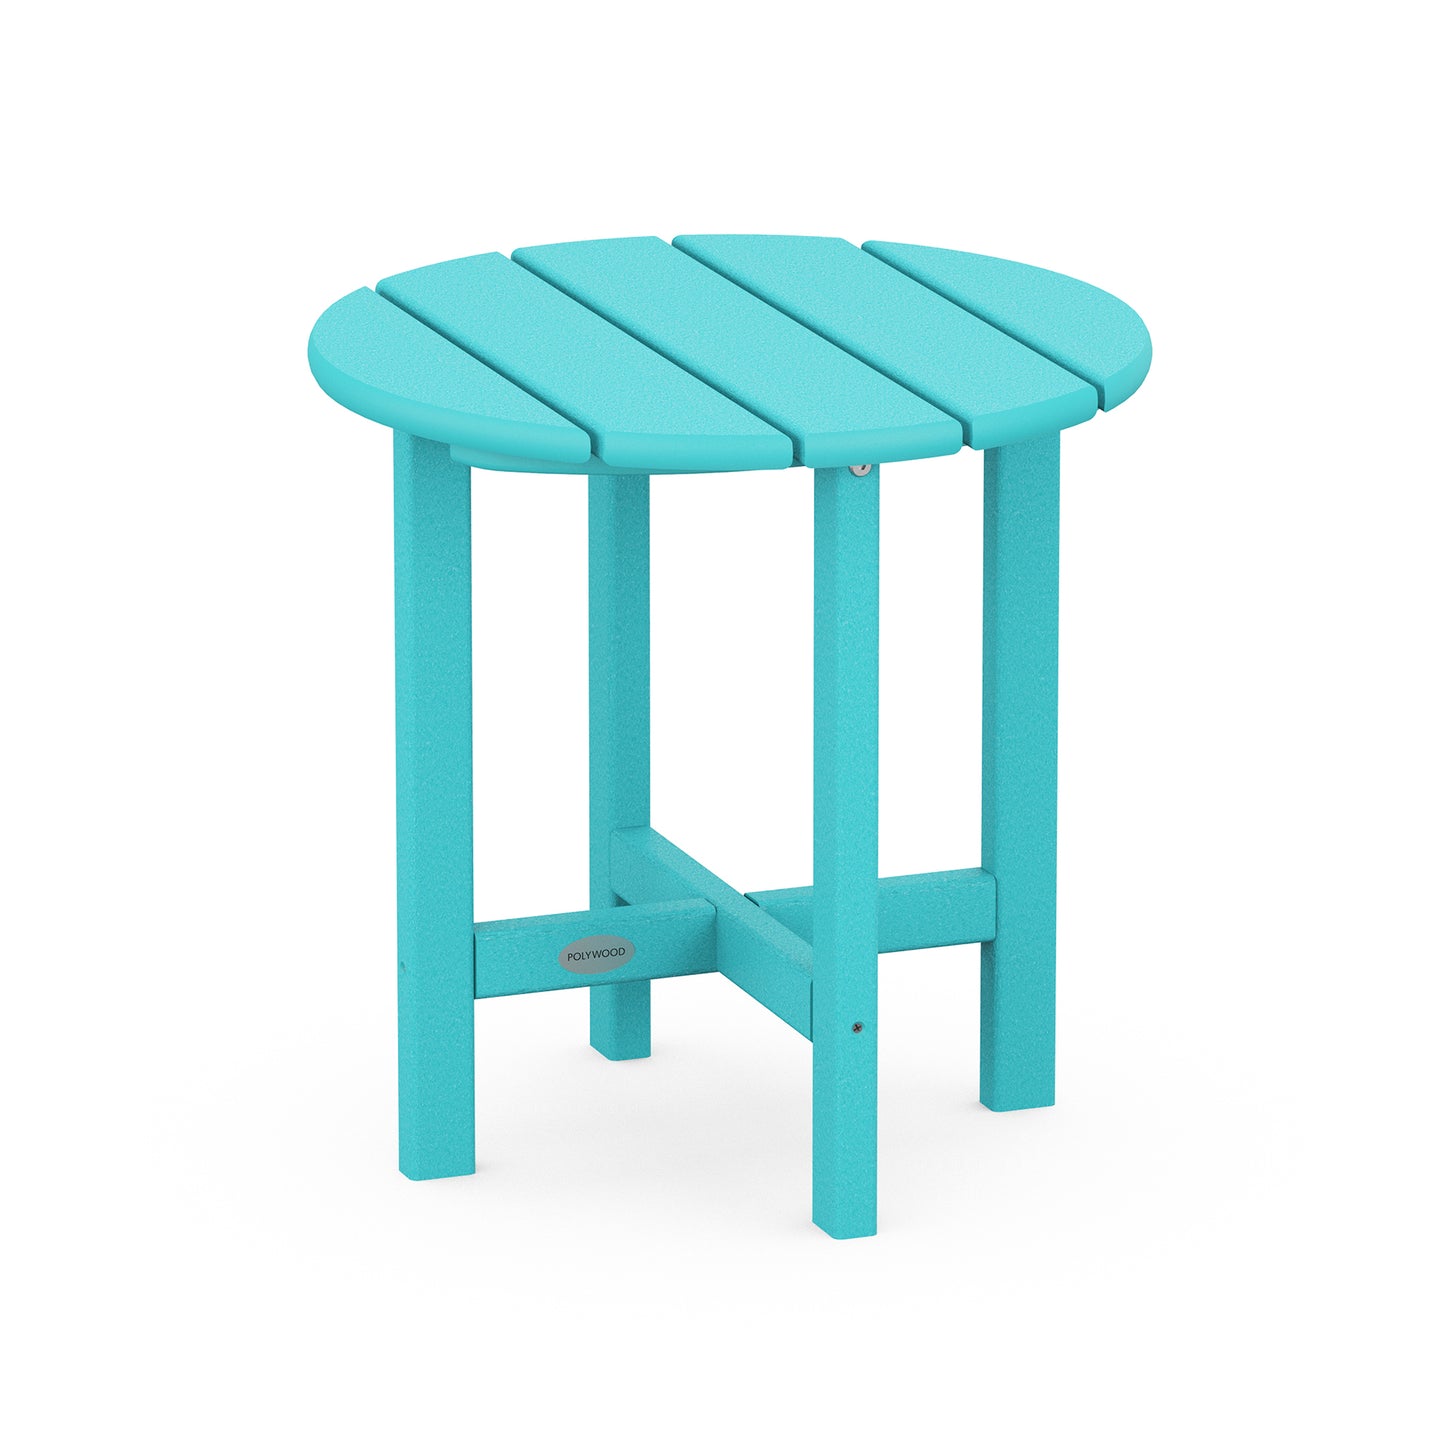 A simple, modern aqua blue POLYWOOD® 18" Round Side Table with a round seat composed of horizontal slats and four sturdy legs, isolated on a white background.